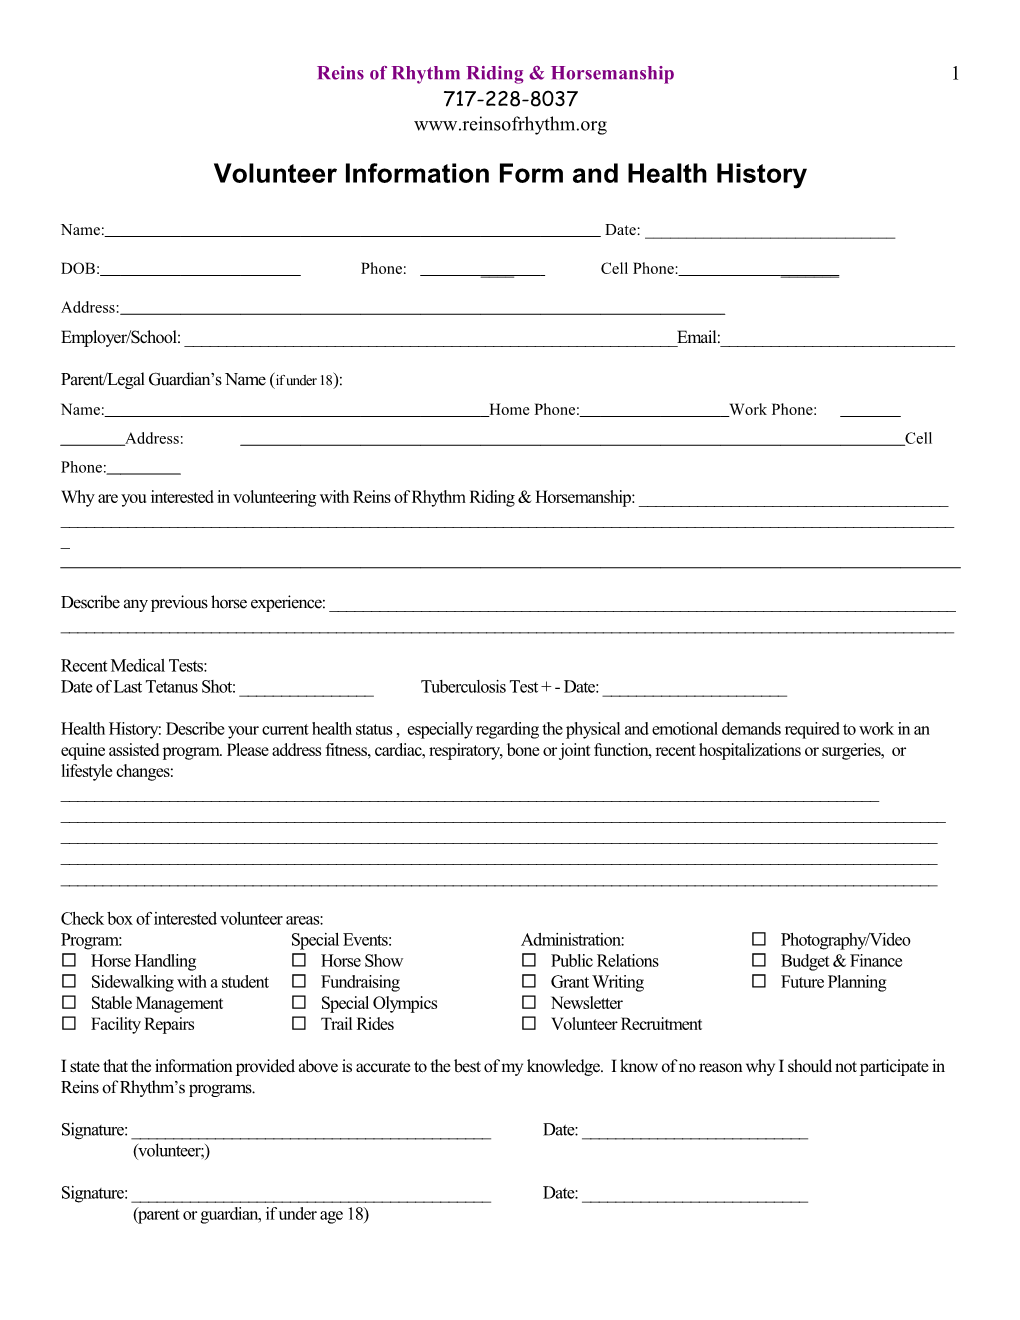 Volunteer Information Form and Health History